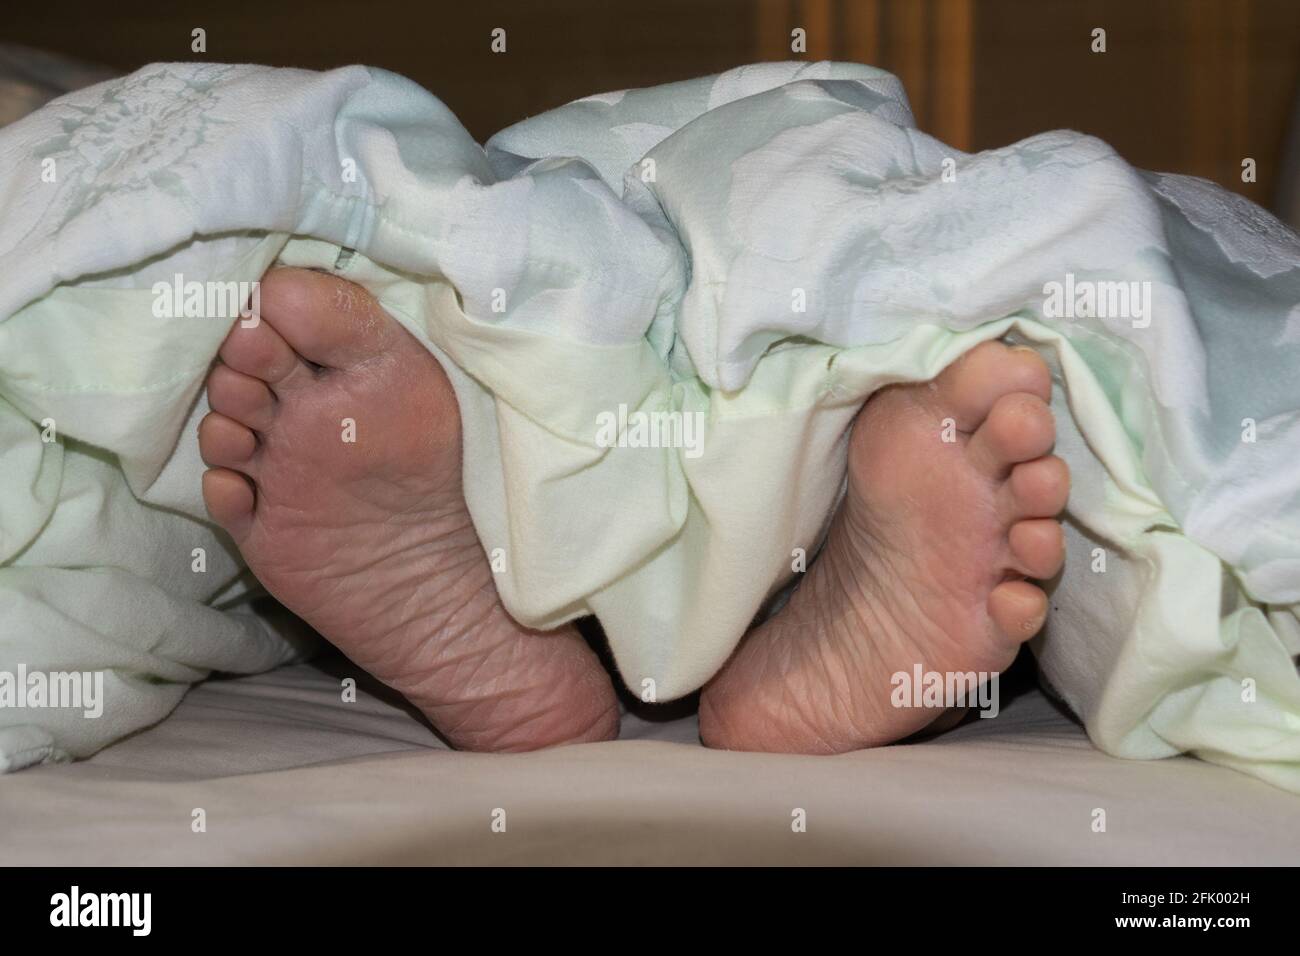 Sleep! Feet sticking out of bed Stock Photo